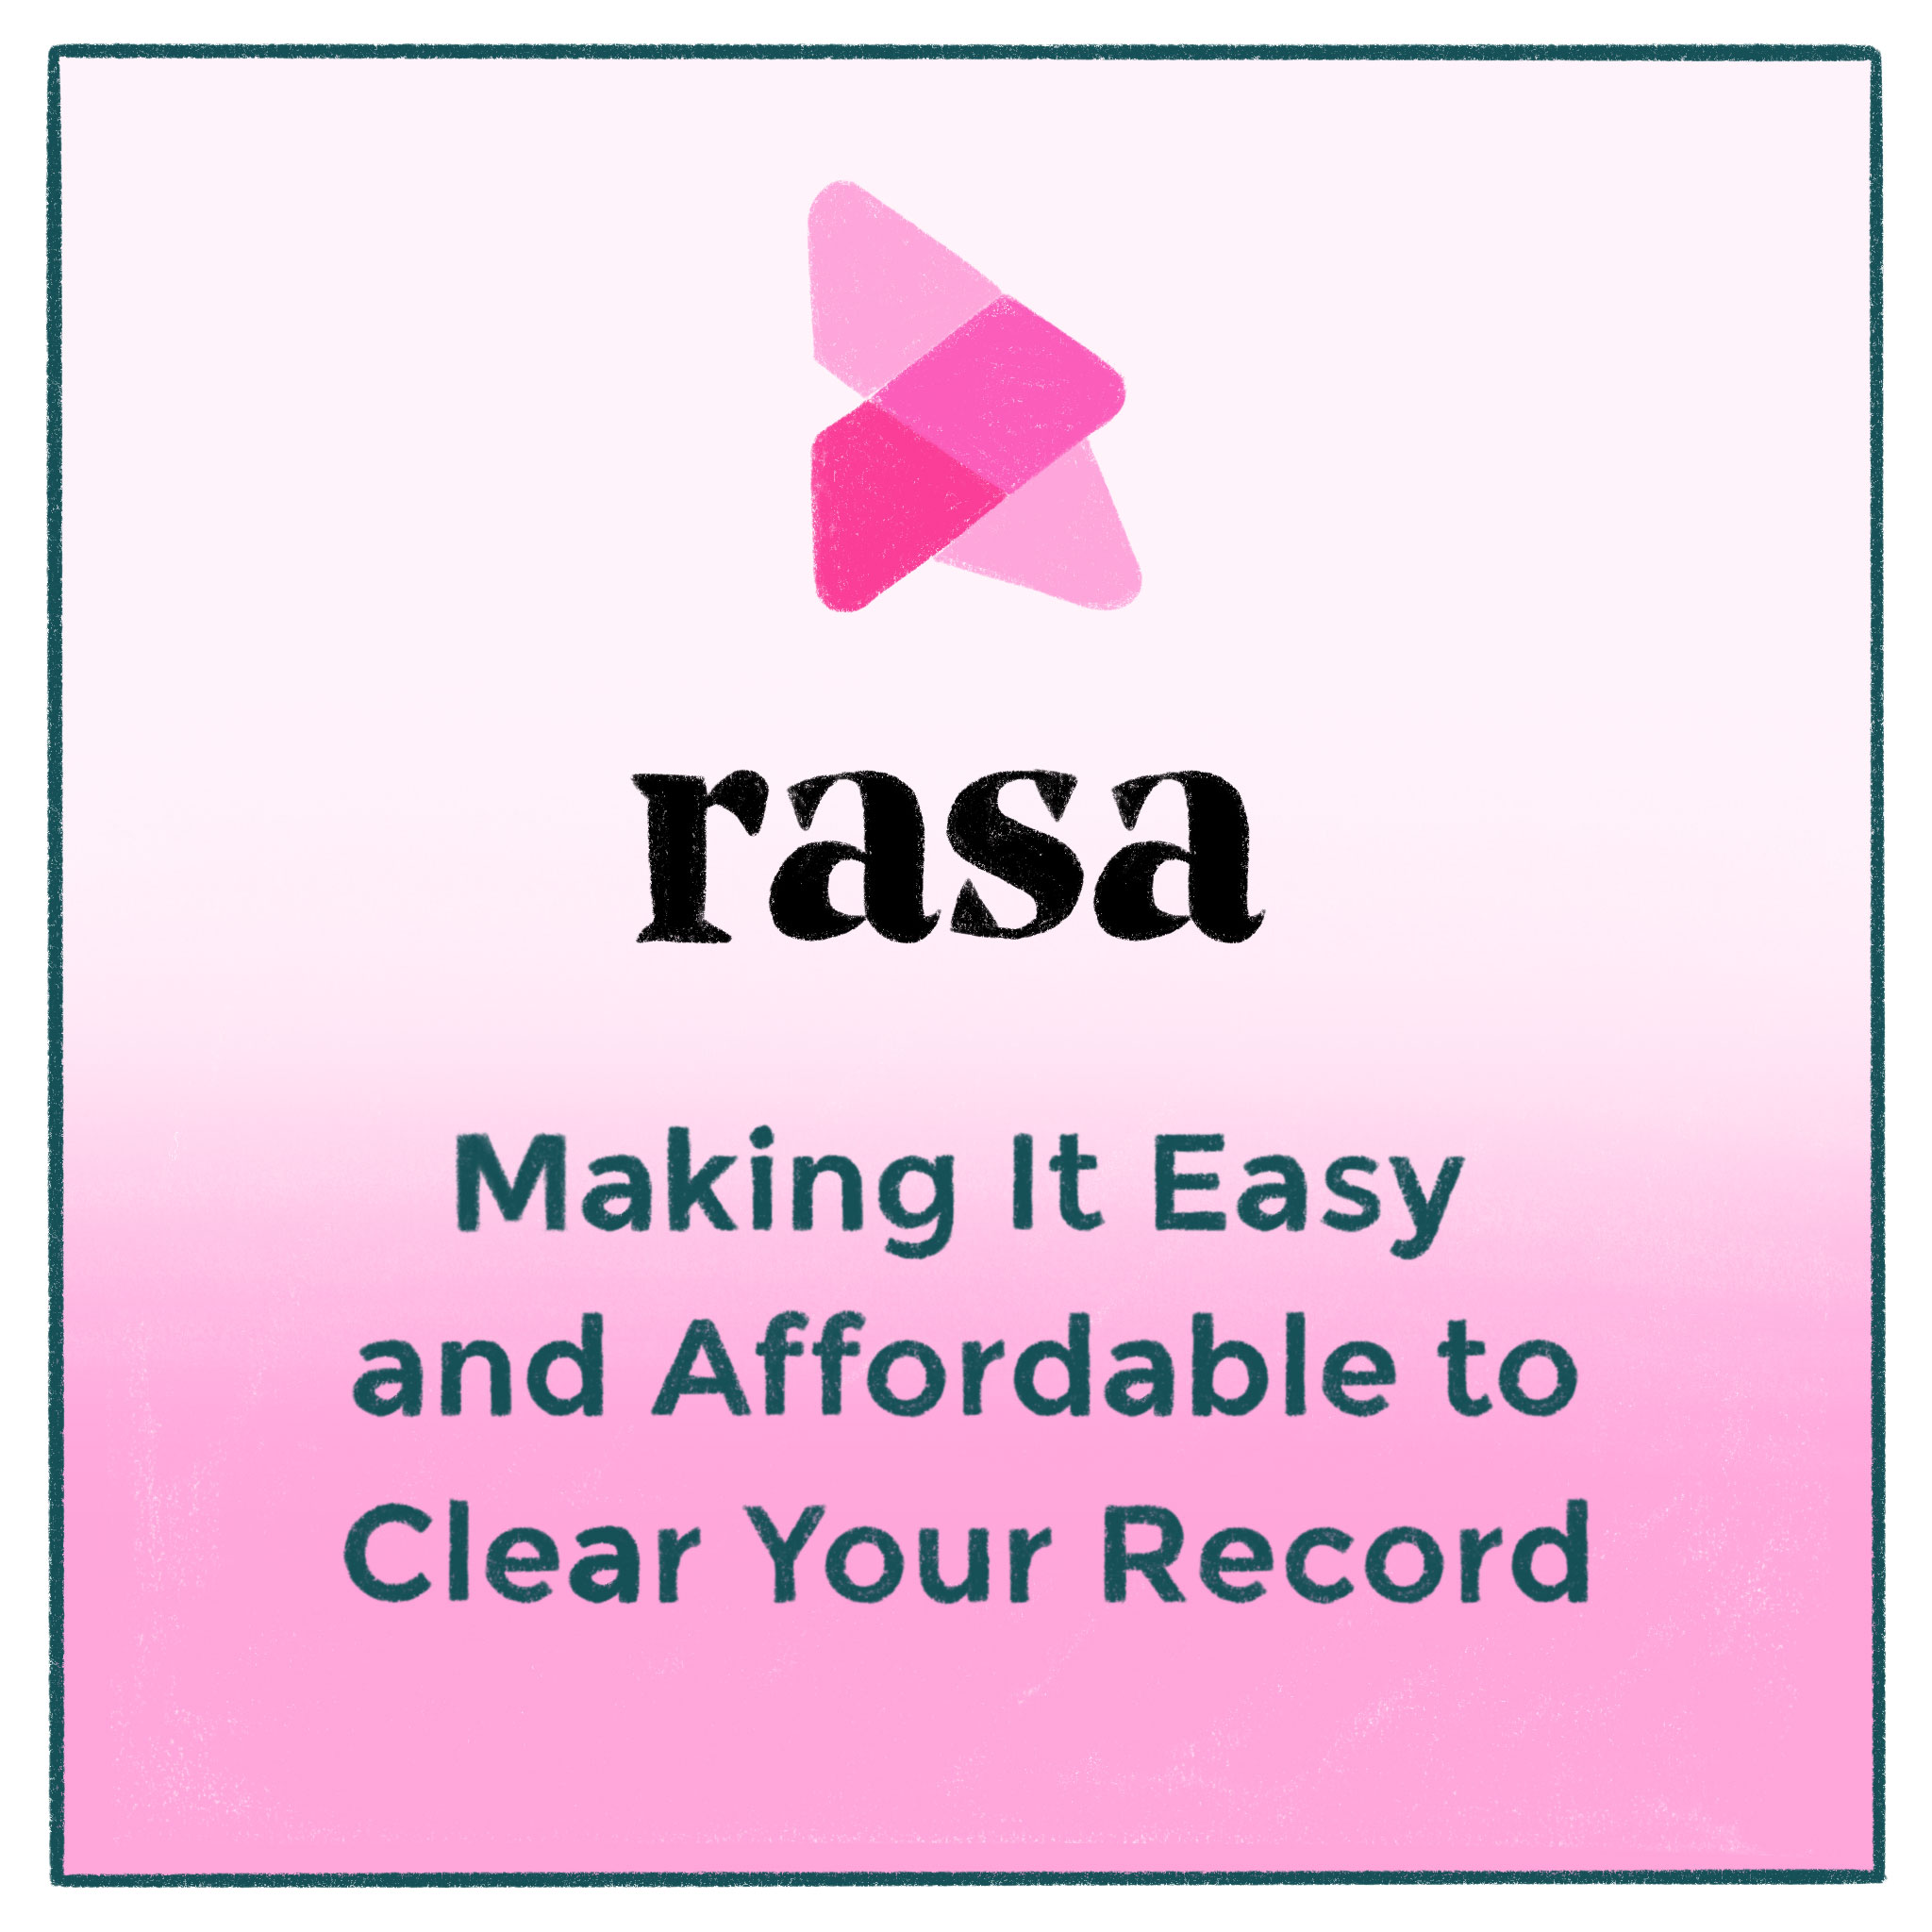 1. Image: Illustrated Rasa logo: Making It Easy and Affordable to Clear Your Record